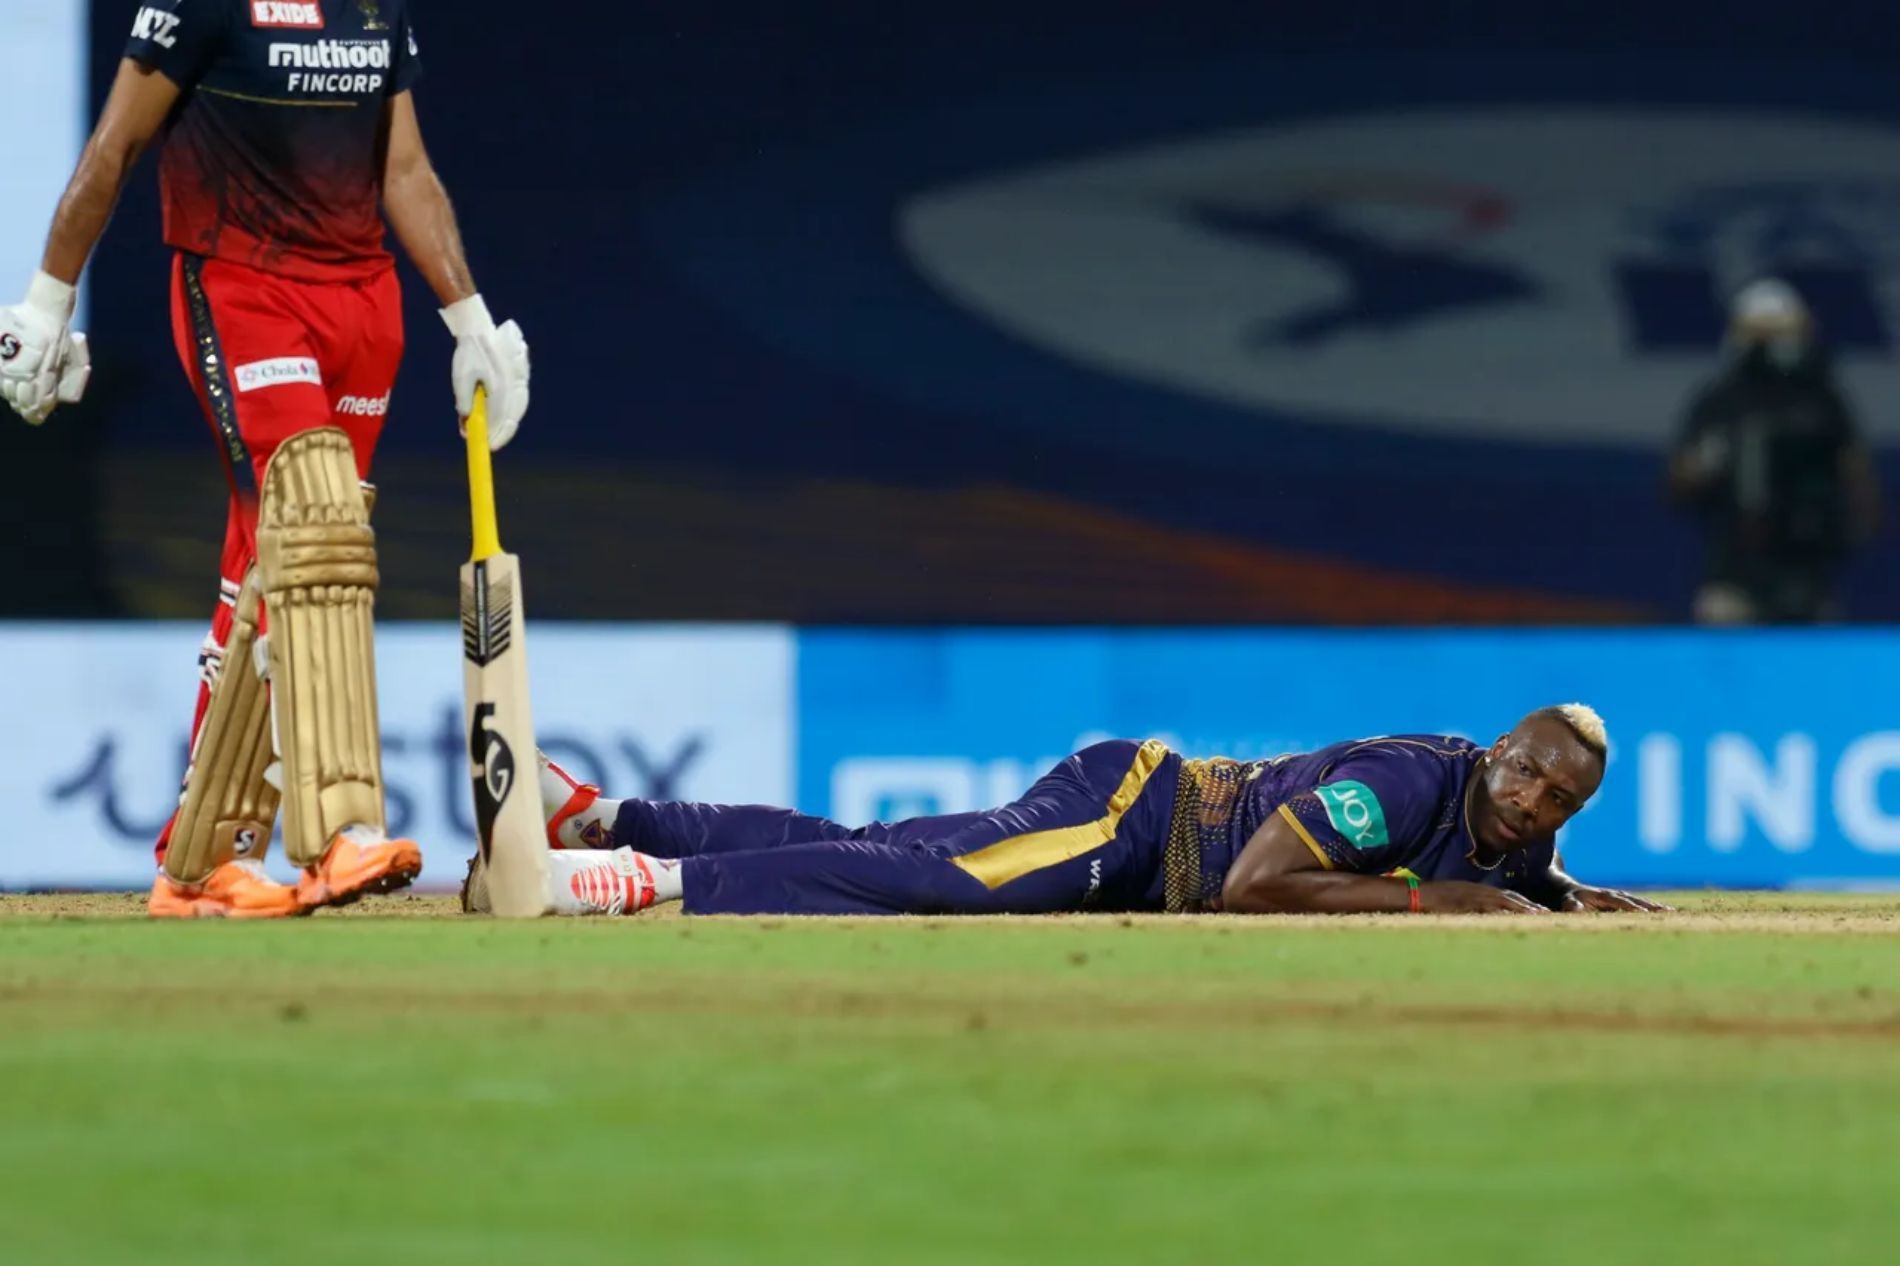 Andre Russell had a poor game with the ball against RCB in Match 6, going for 36 in 2.2 overs. However, in KKR&rsquo;s next match, he clobbered an unbeaten 70 off 31 against Punjab.